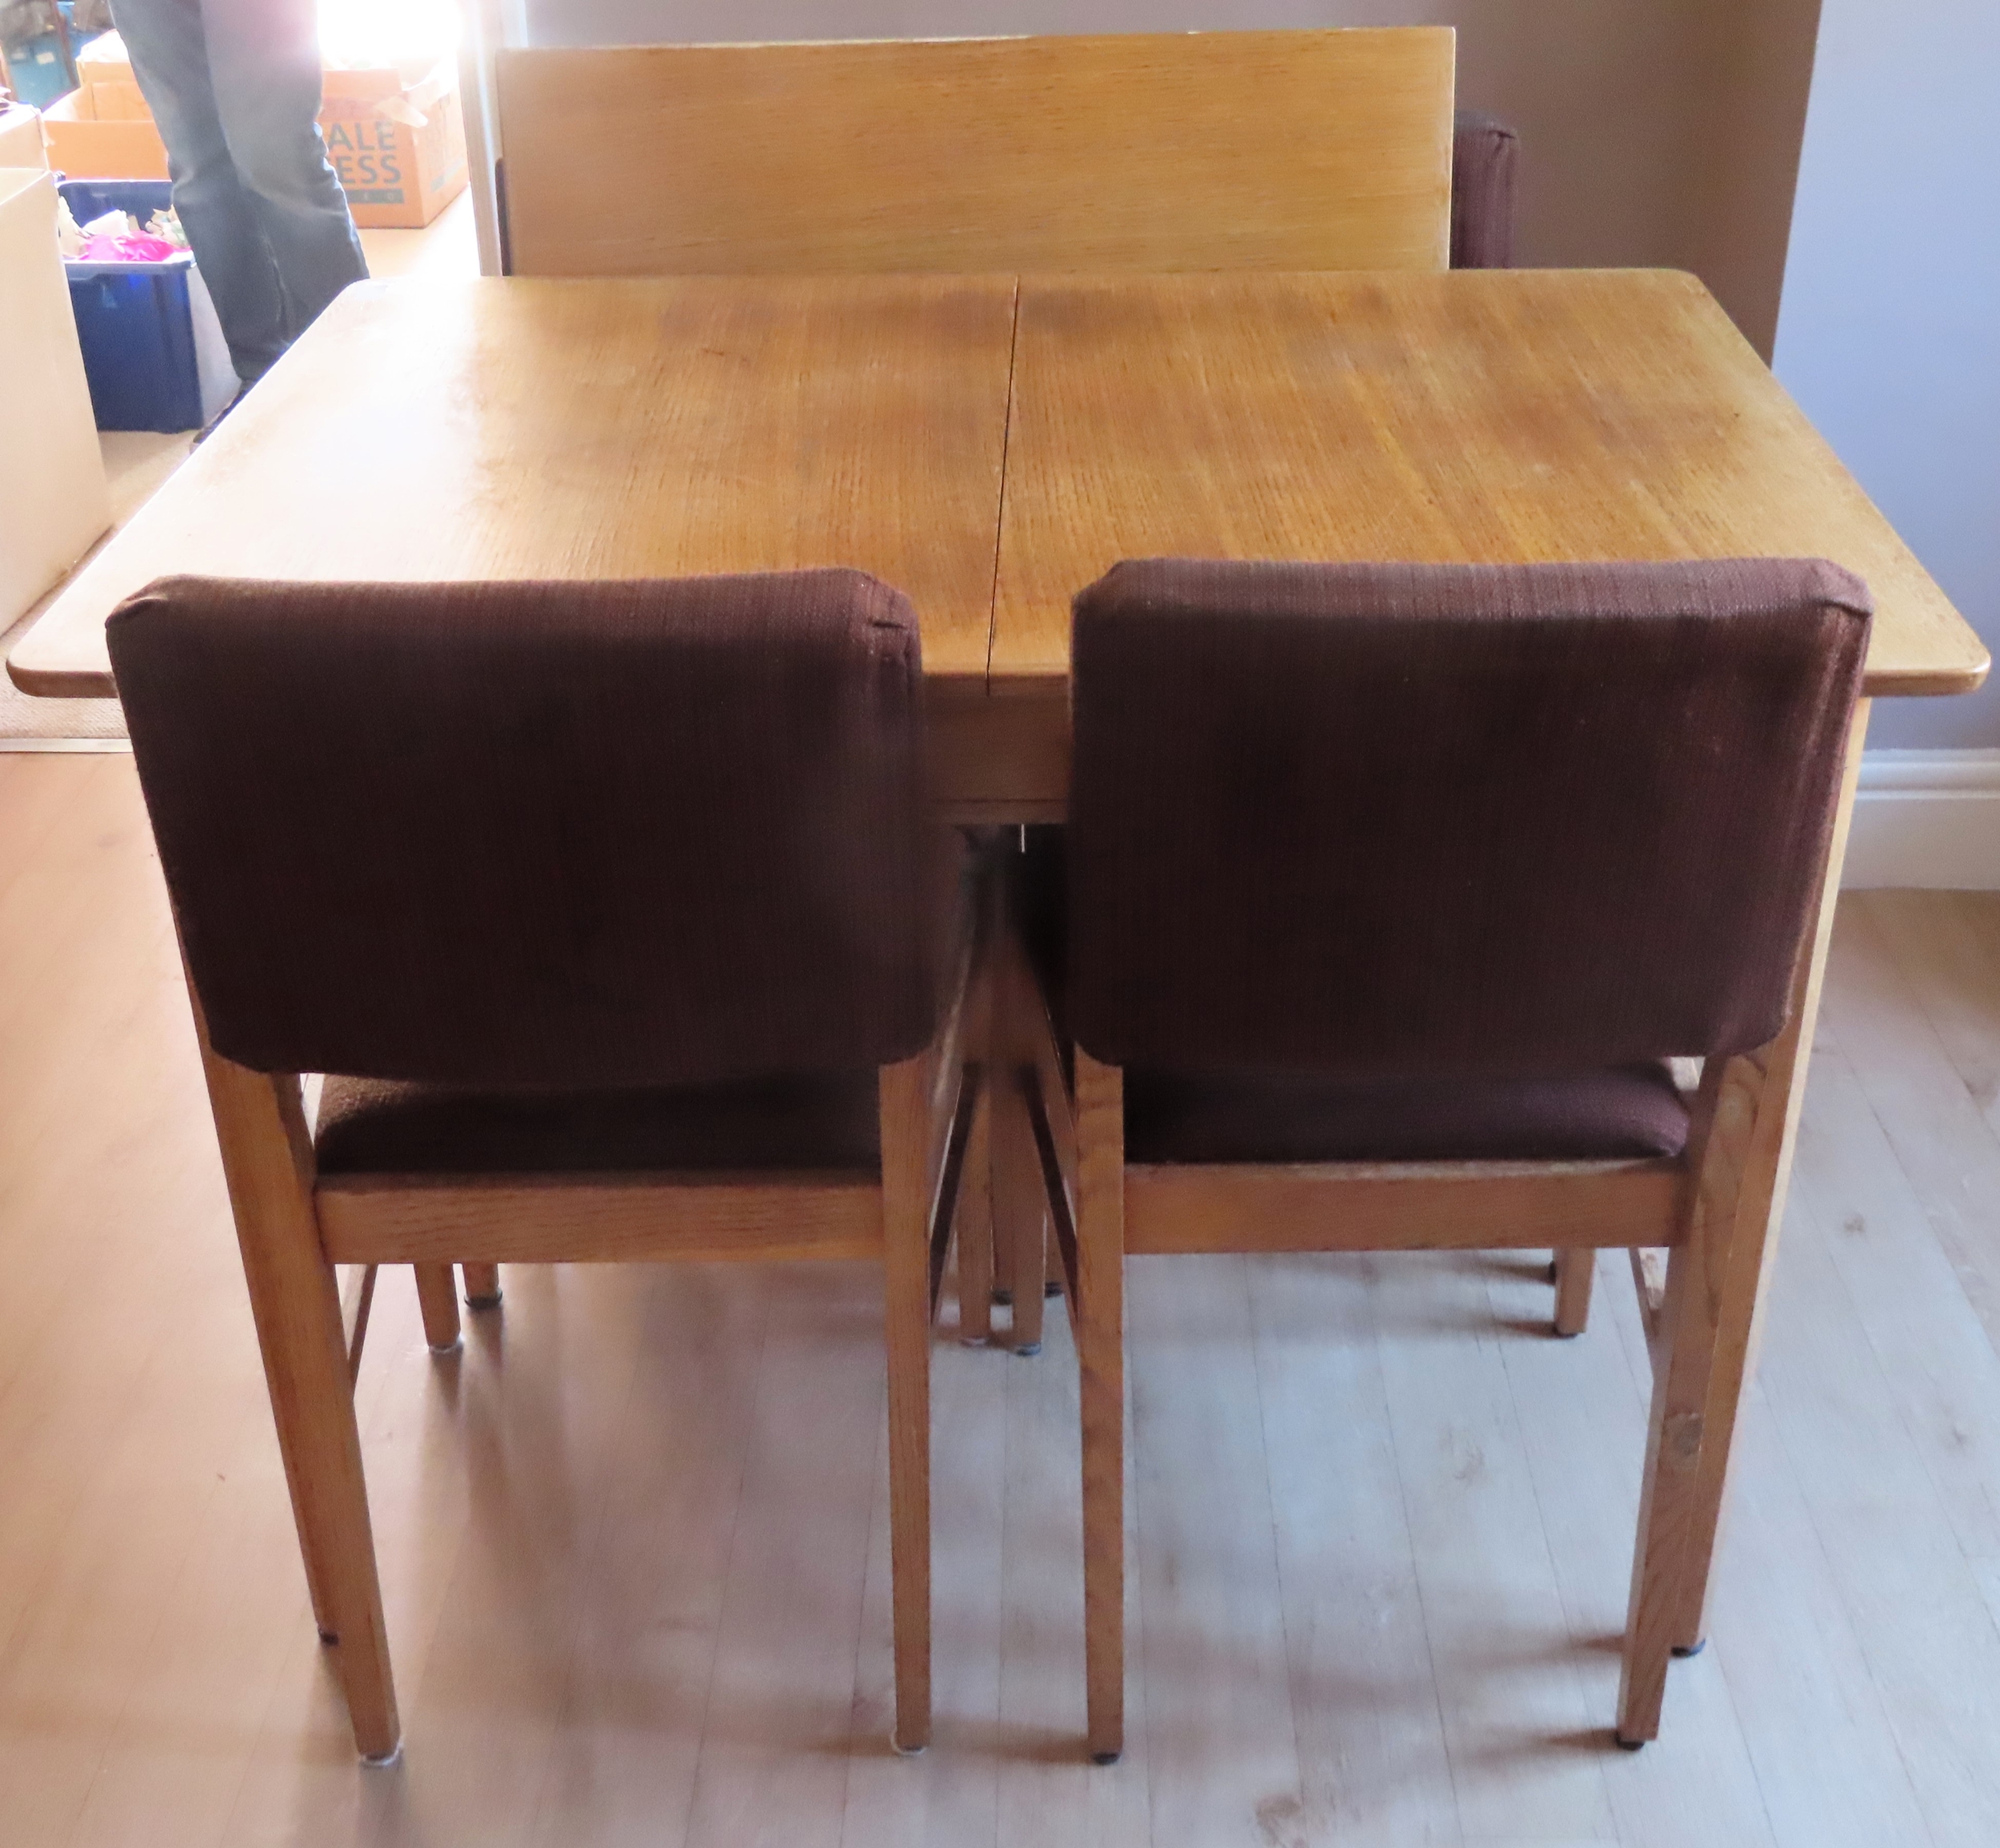 Gordon Russell mid 20th century light oak dining table with one leaf plus four chairs. Table approx.